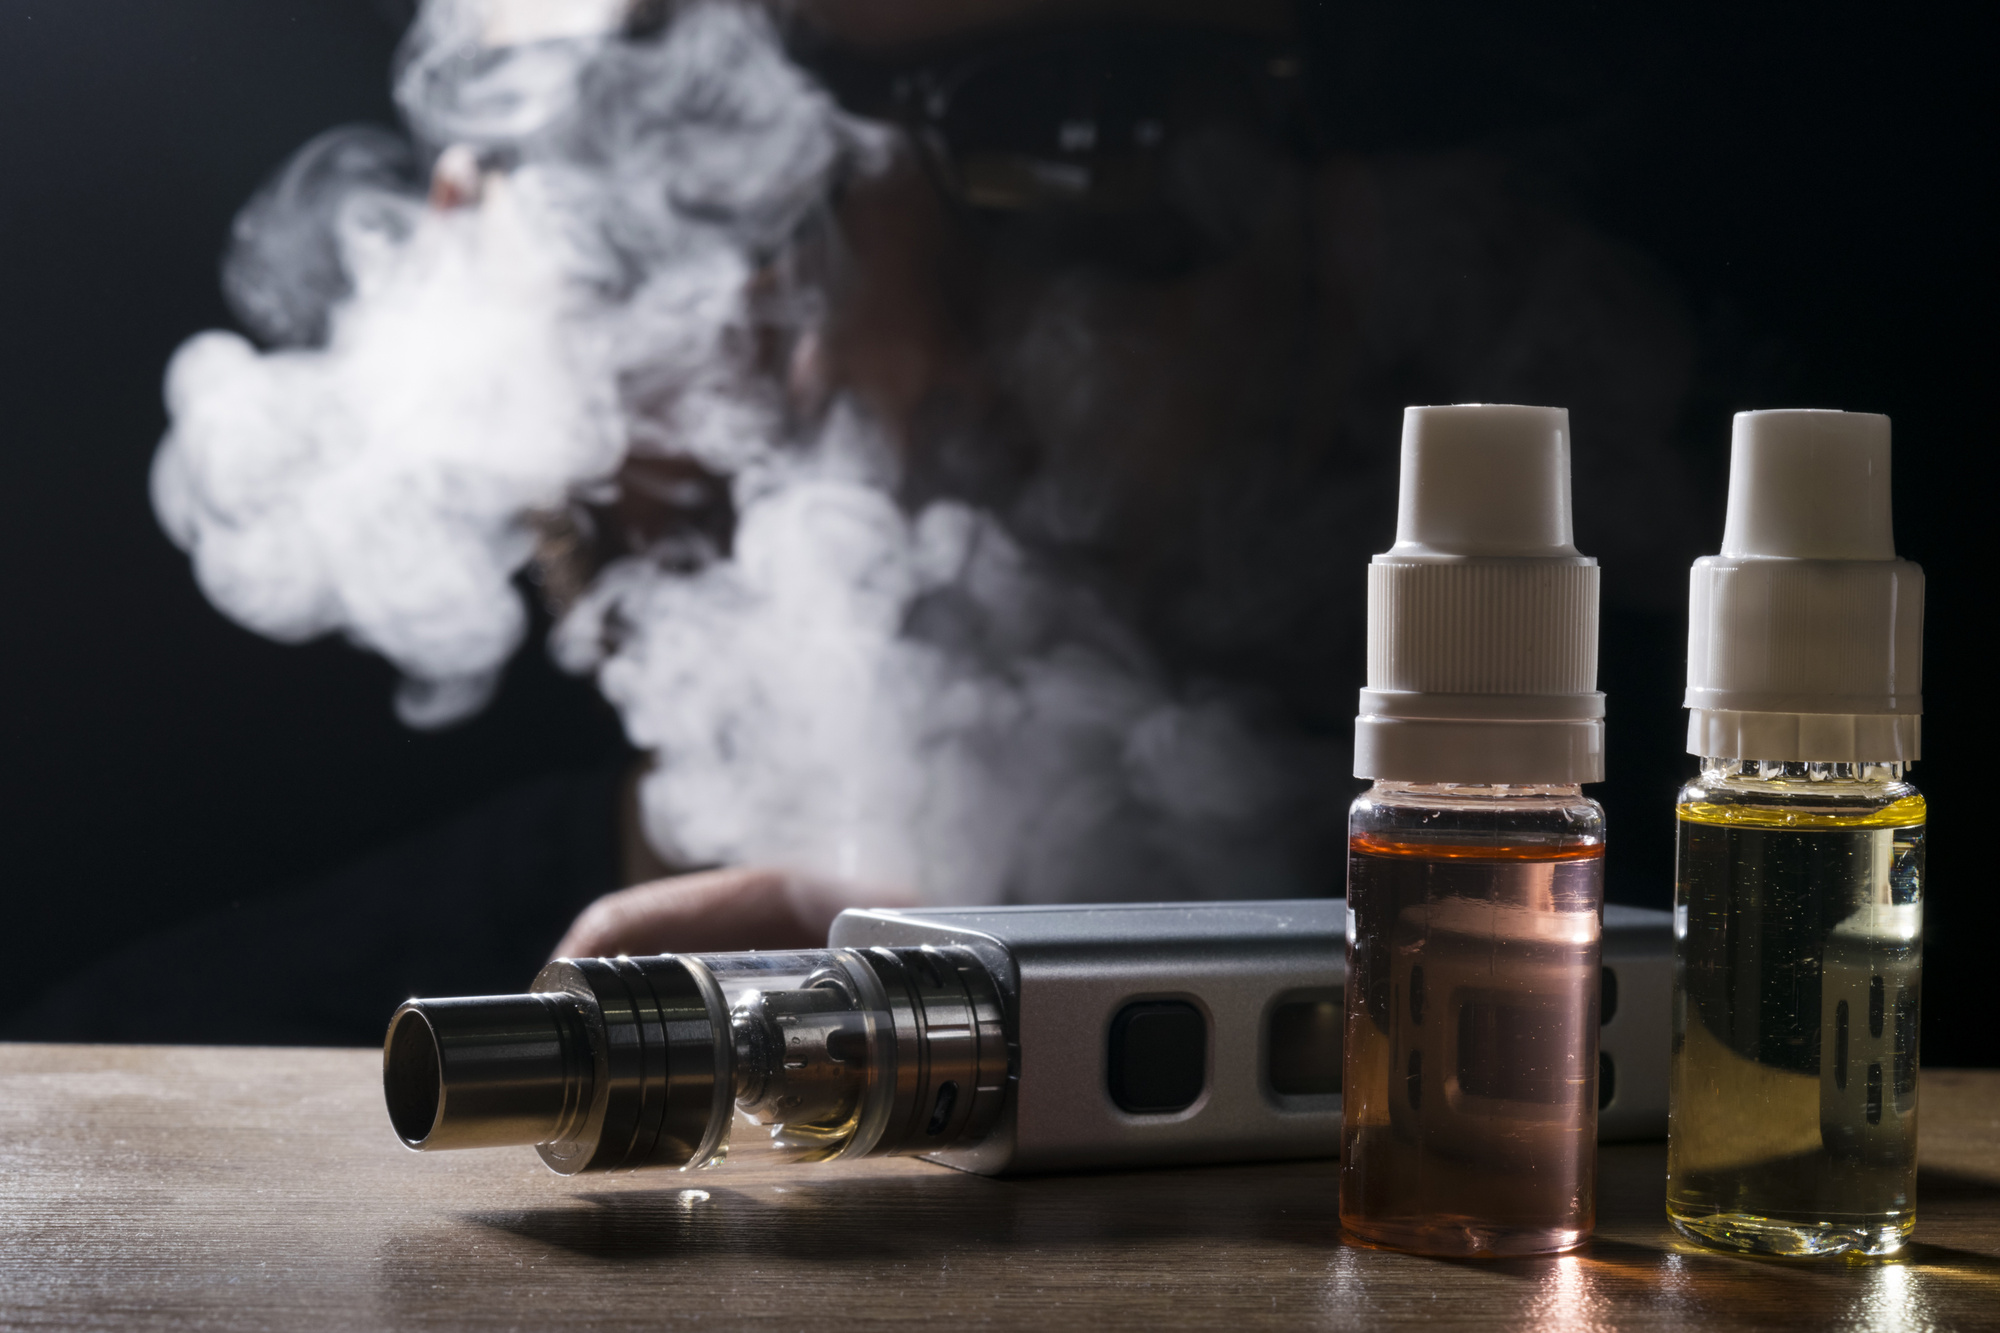 Finding the right vape for your needs involves knowing what can hinder your progress. Here are common vape buying mistakes and how to avoid them.